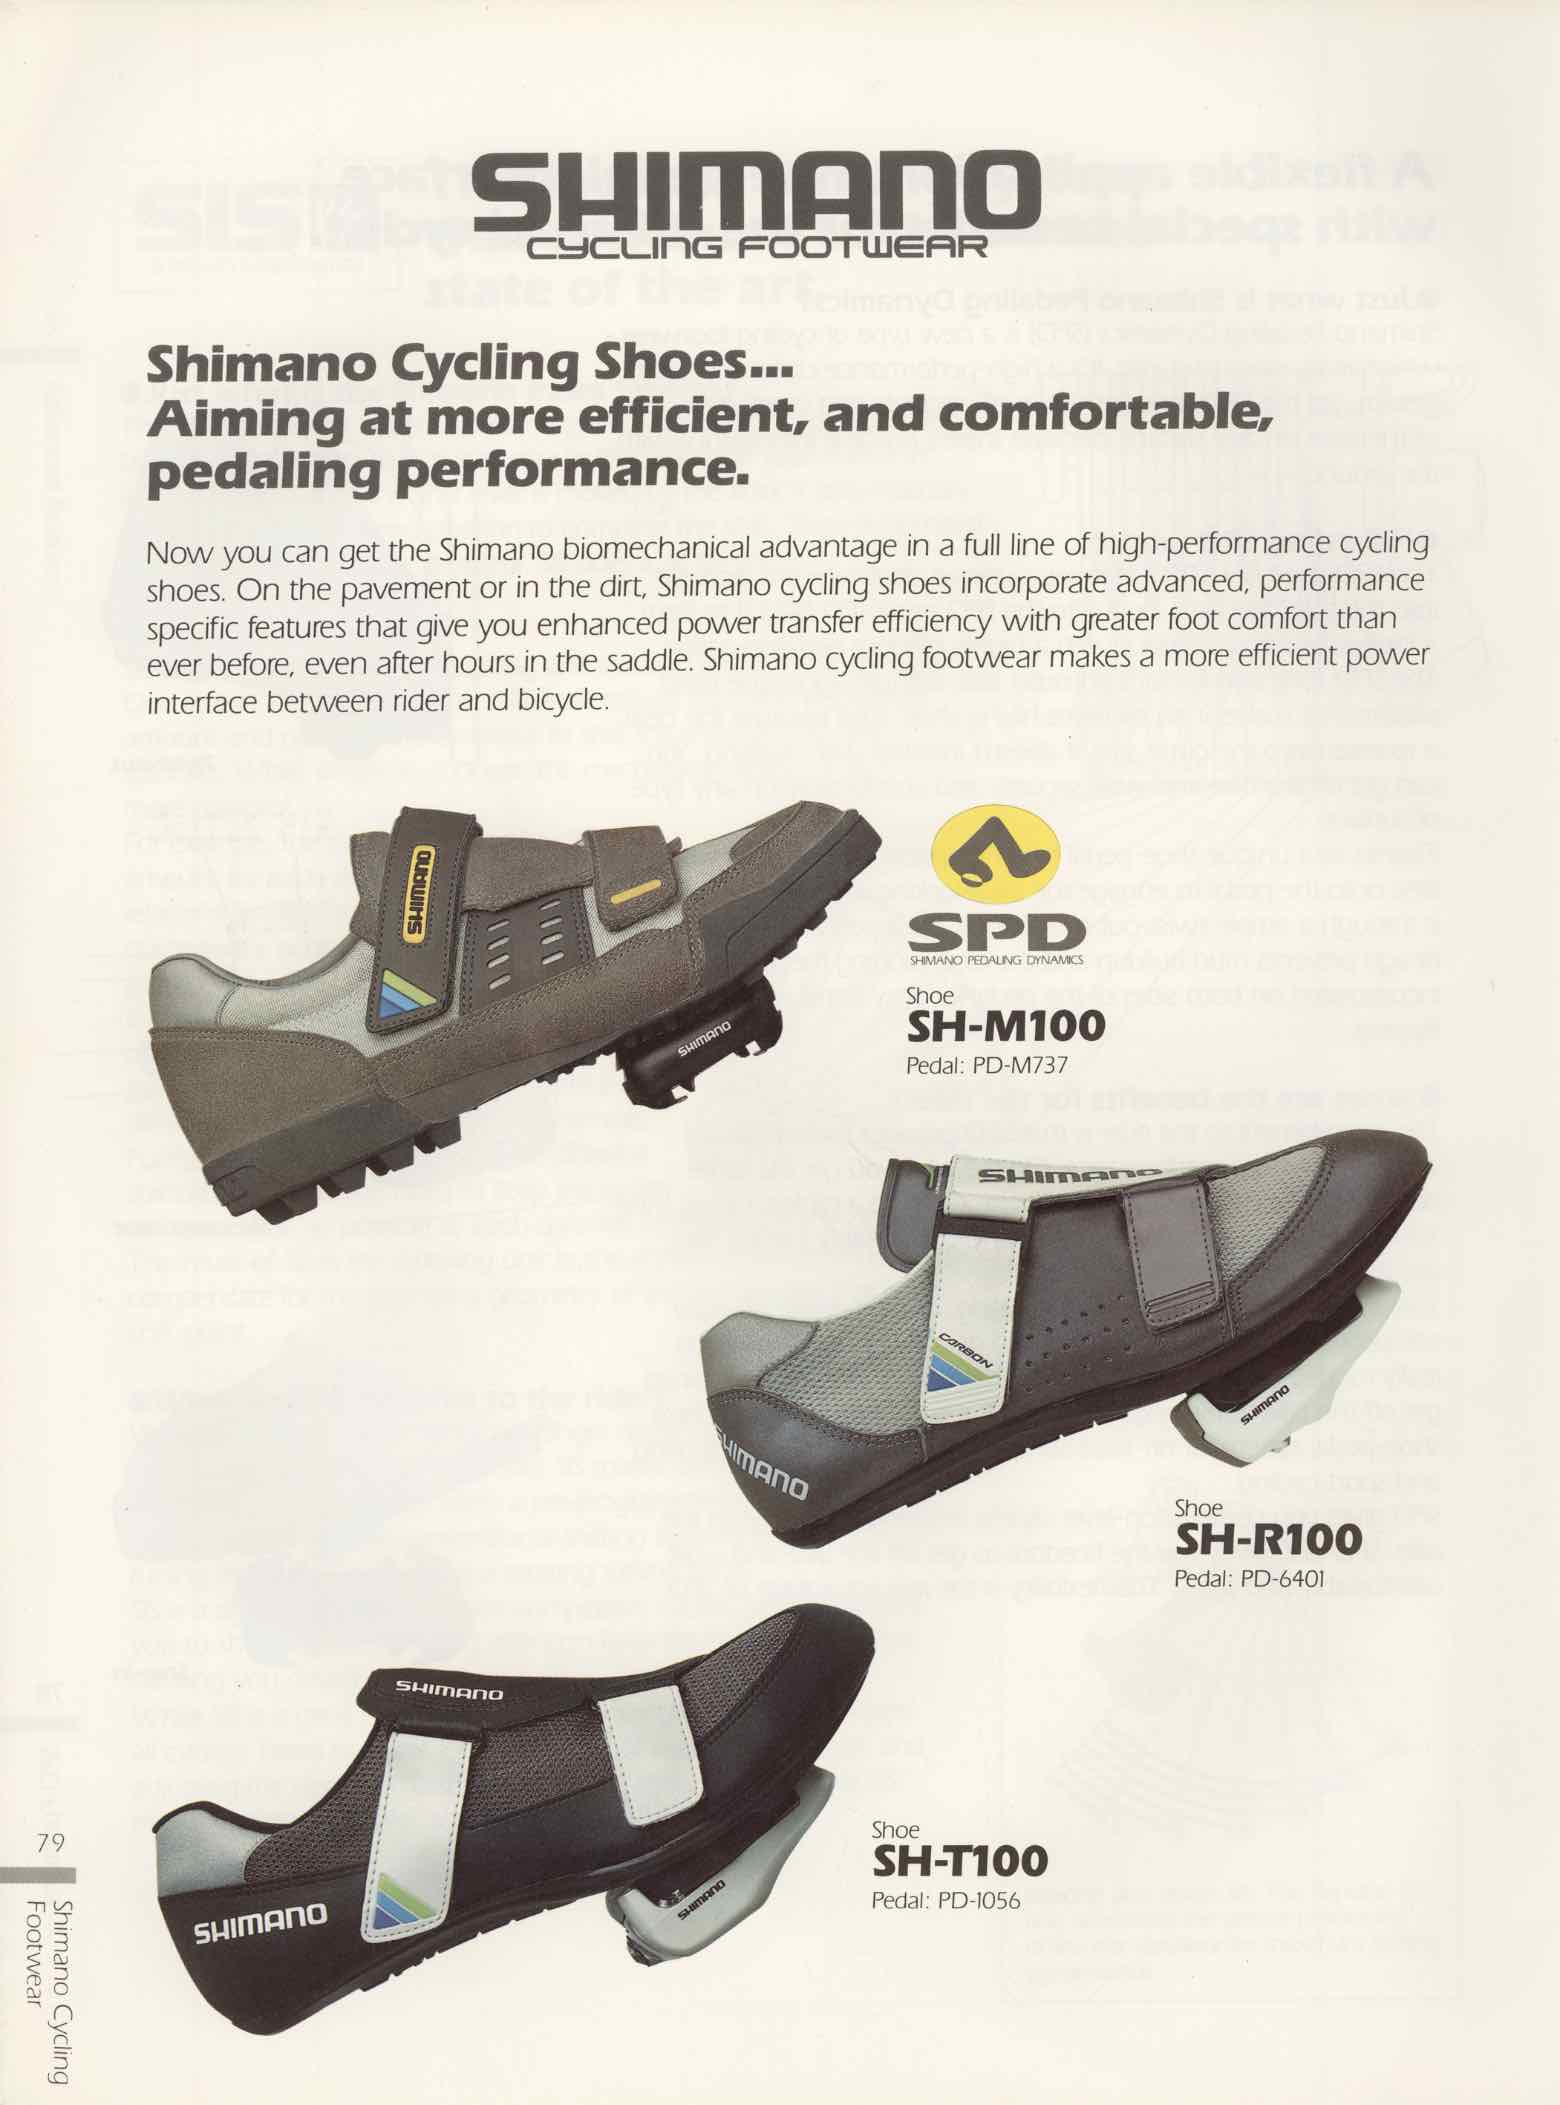 Shimano Bicycle System Component - 91 Page 79 main image